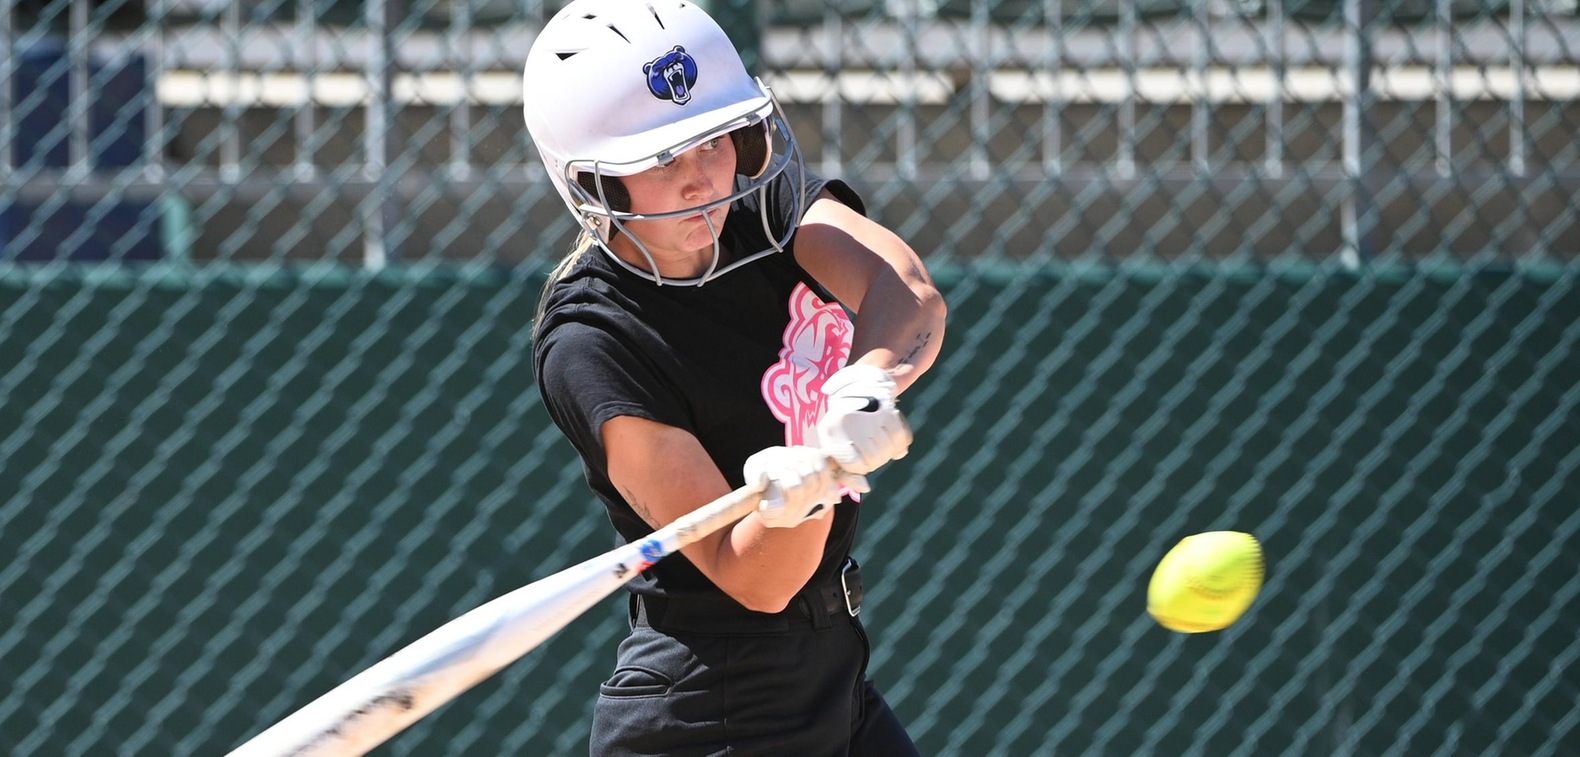 Sami Reding launched two home runs in the victory.